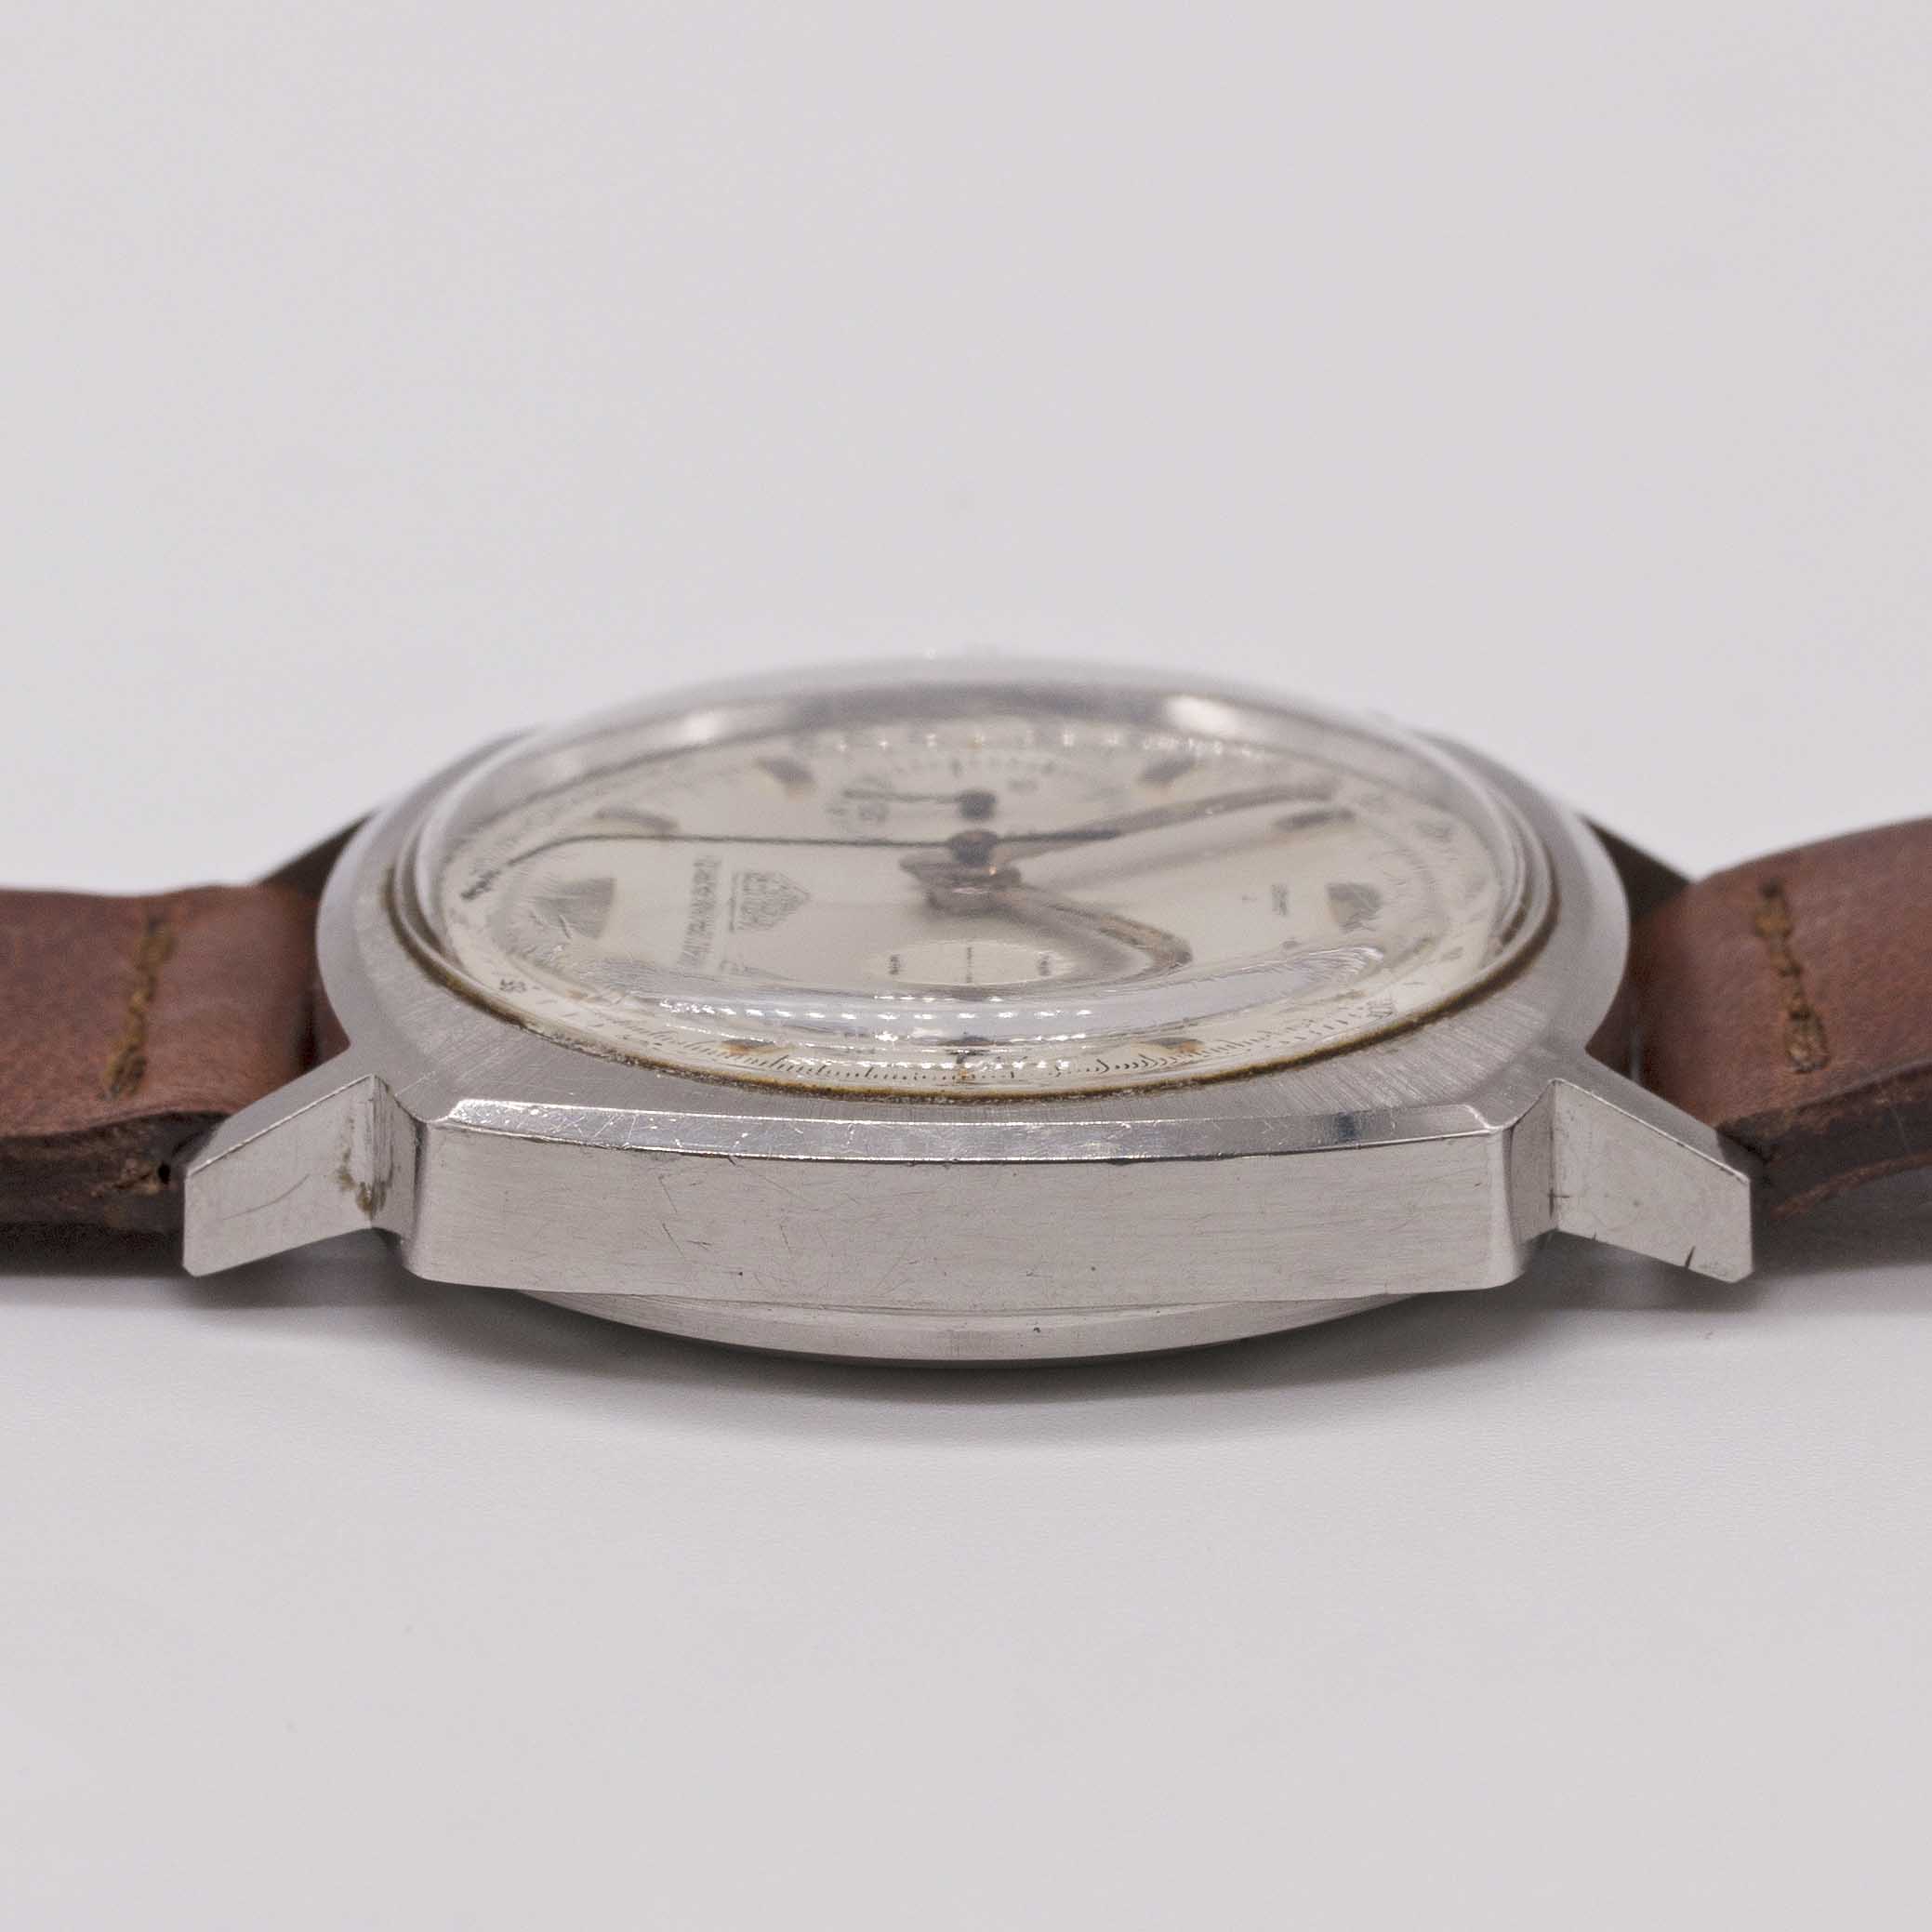 A GENTLEMAN'S STAINLESS STEEL HEUER CAMARO CHRONOGRAPH WRIST WATCH CIRCA 1970, REF. 9220T WITH - Image 8 of 9